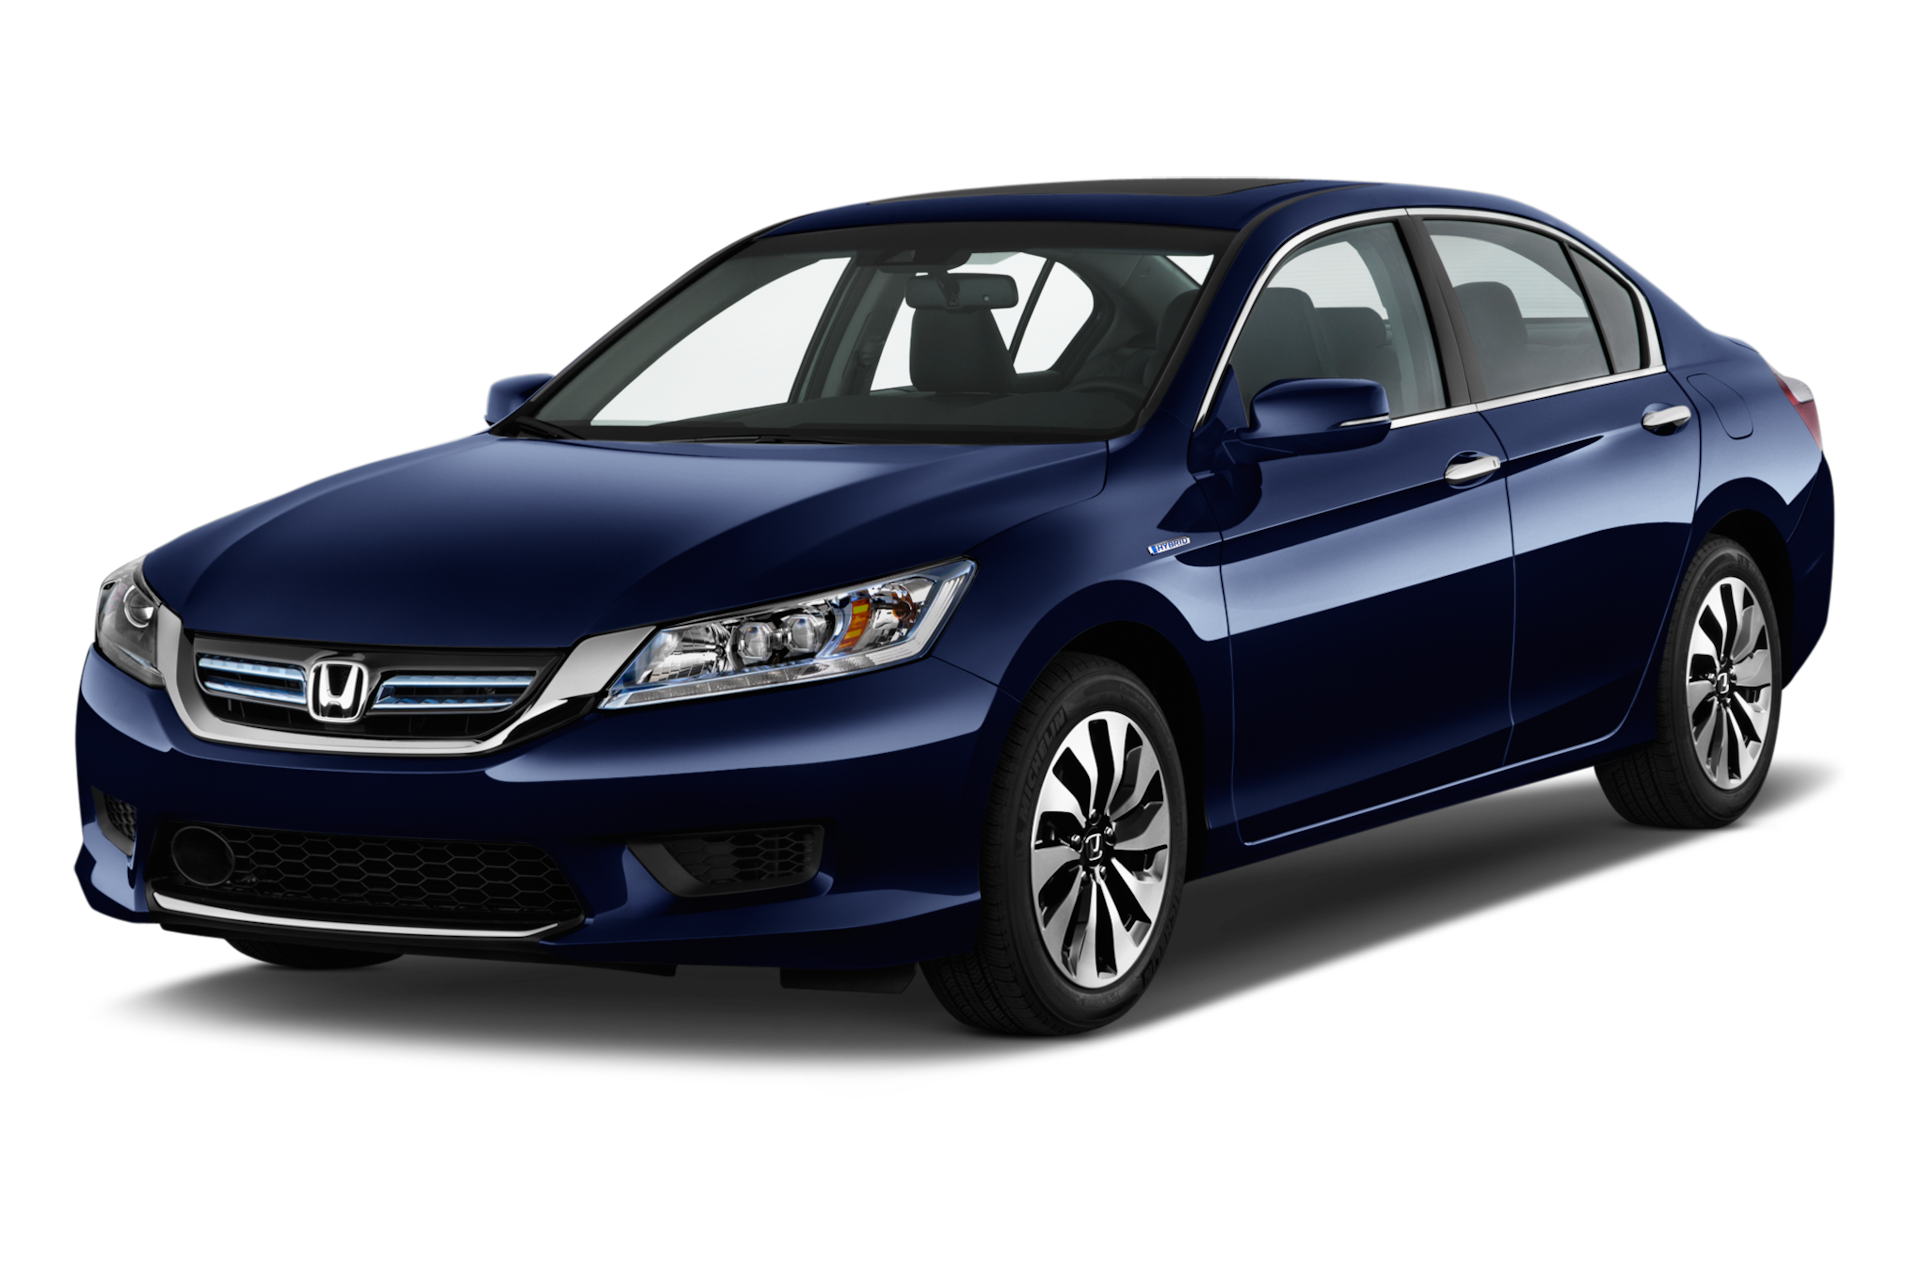 2015 Honda Accord Hybrid Prices, Reviews, and Photos - MotorTrend